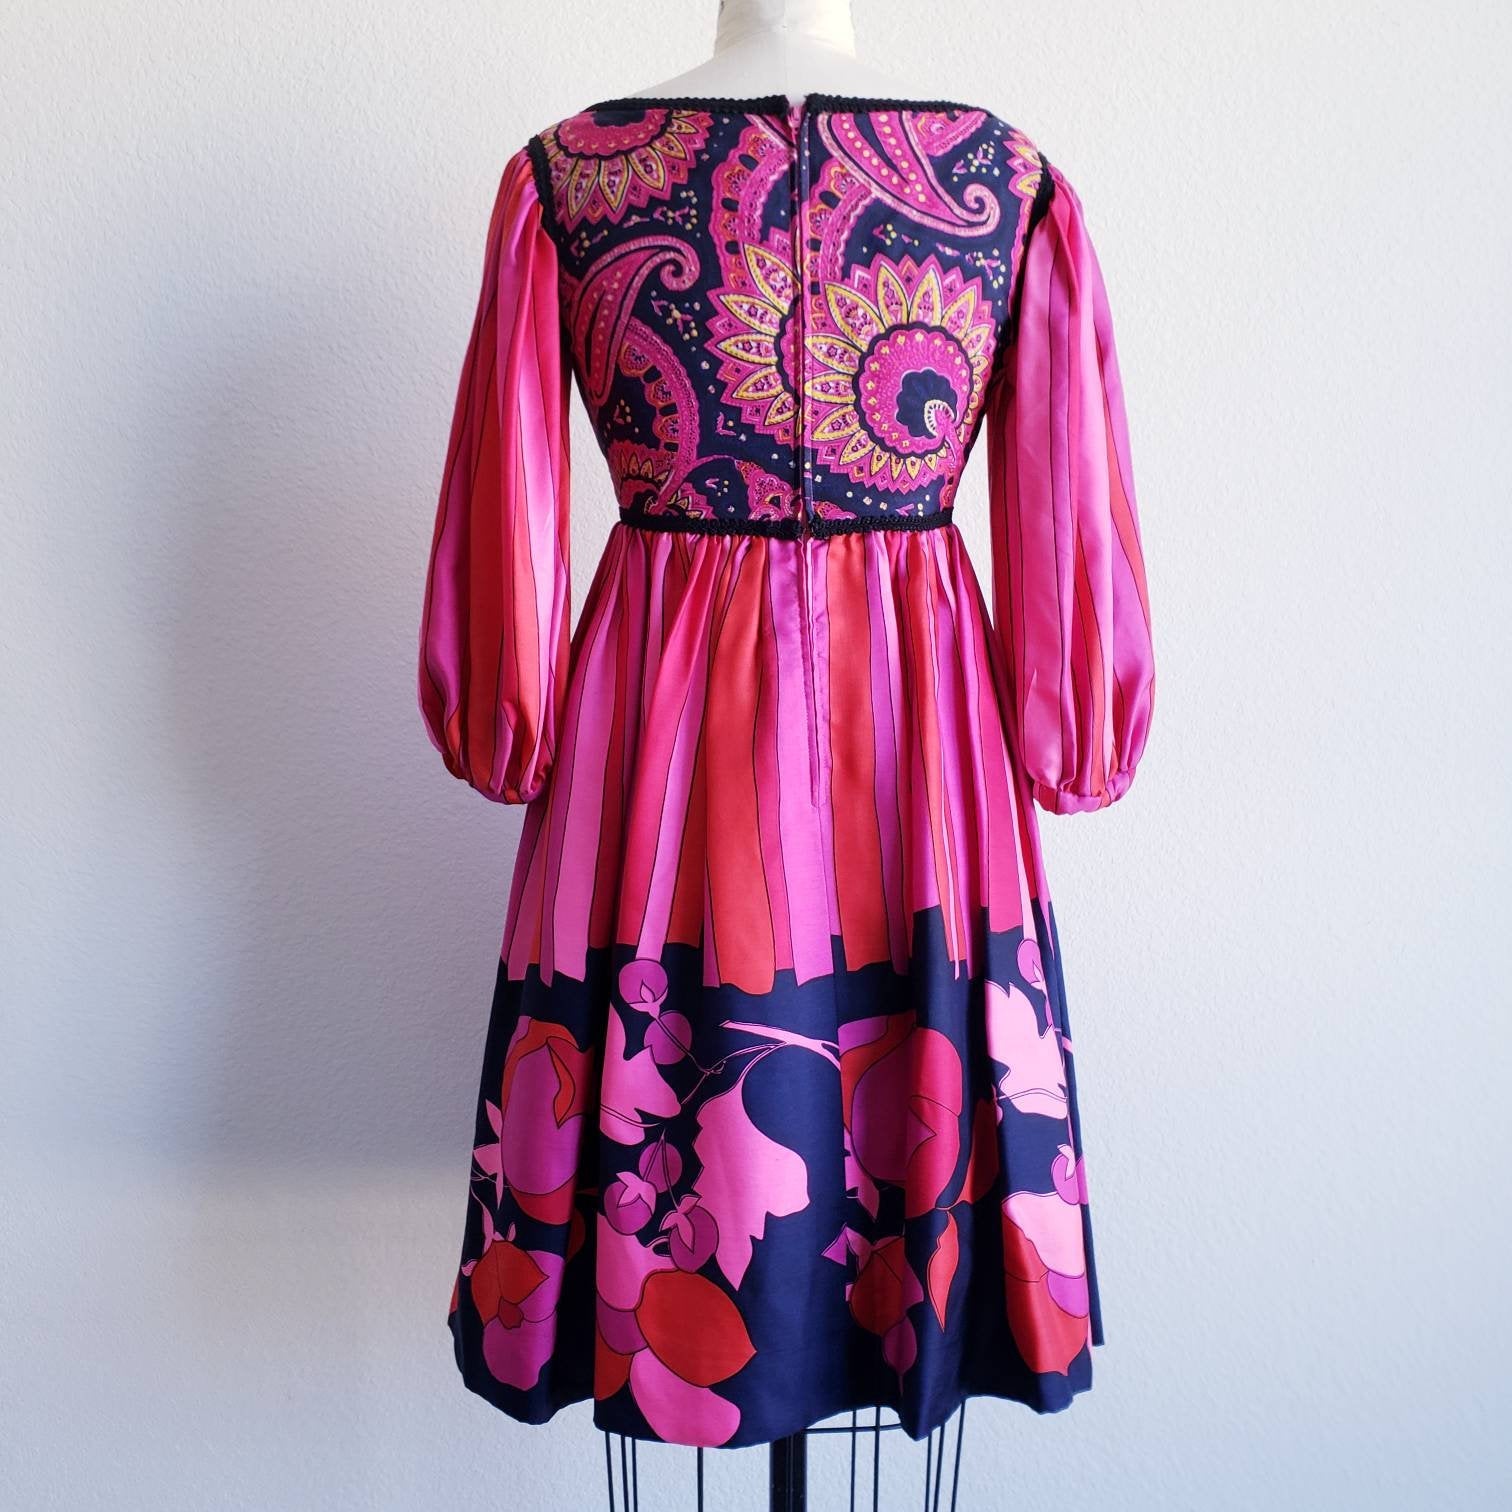 Vintage 70s Empire Waist Mixed Pattern Pink Red Dress